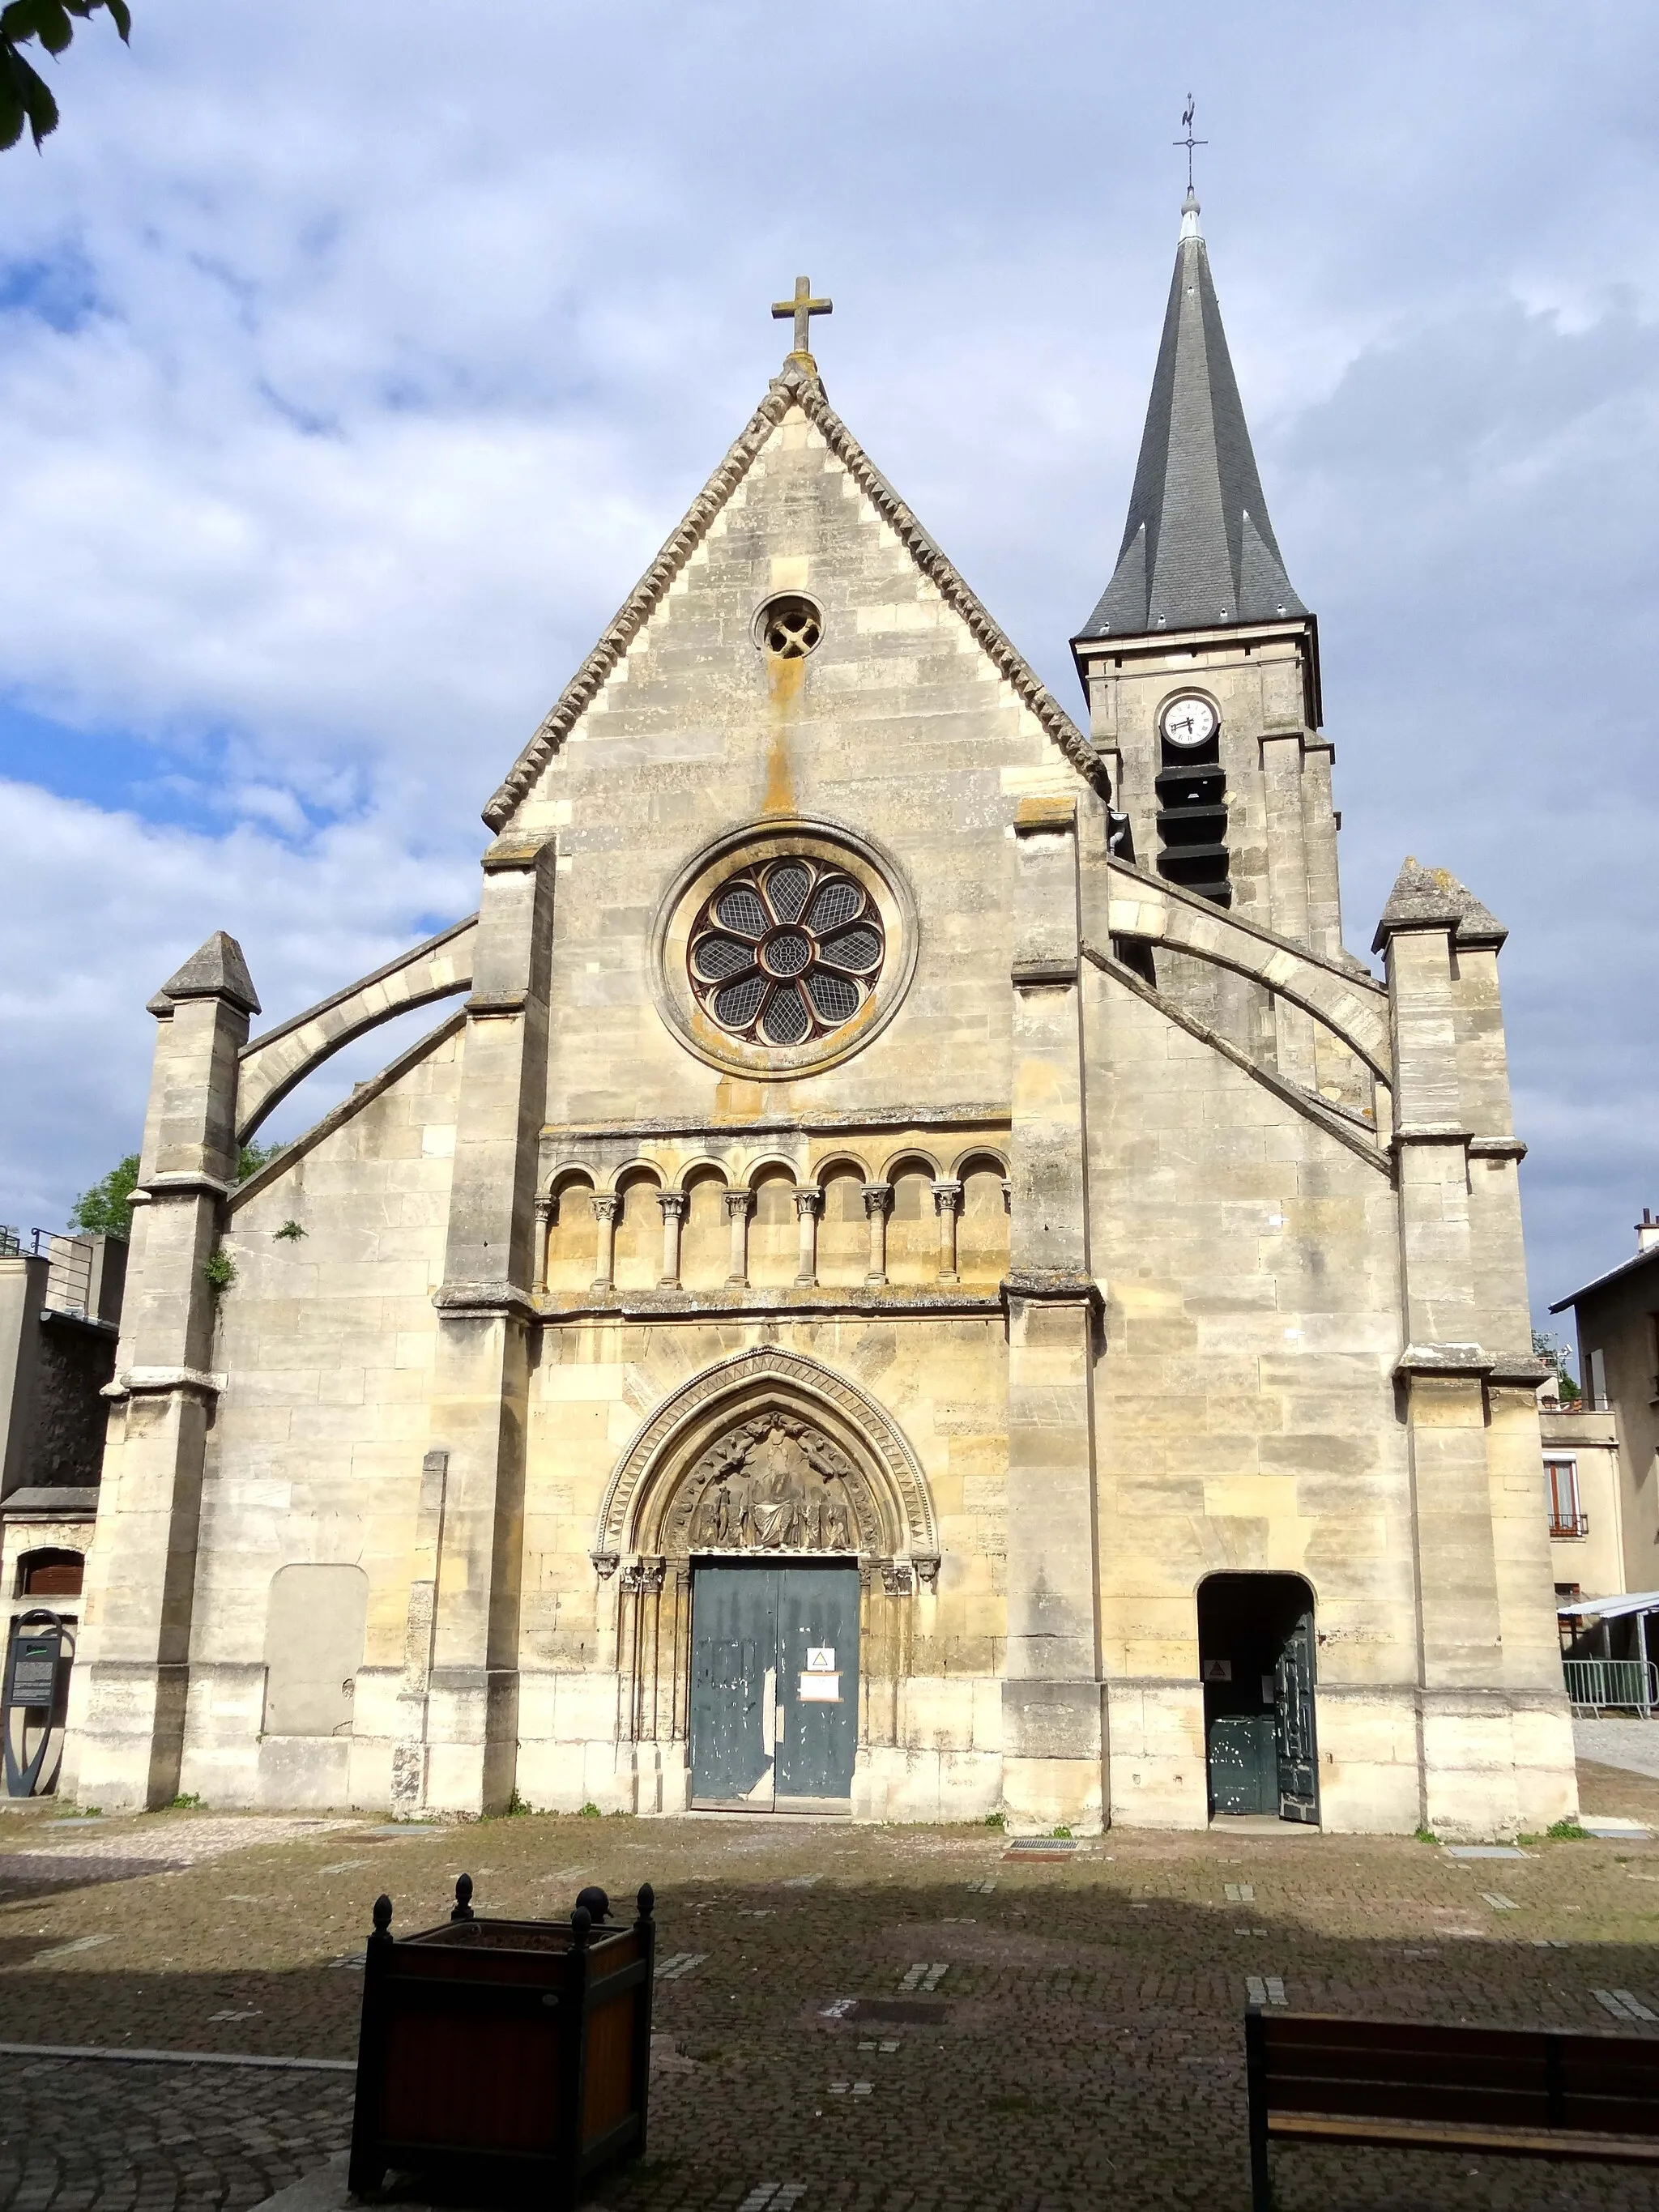 Image of Bagneux